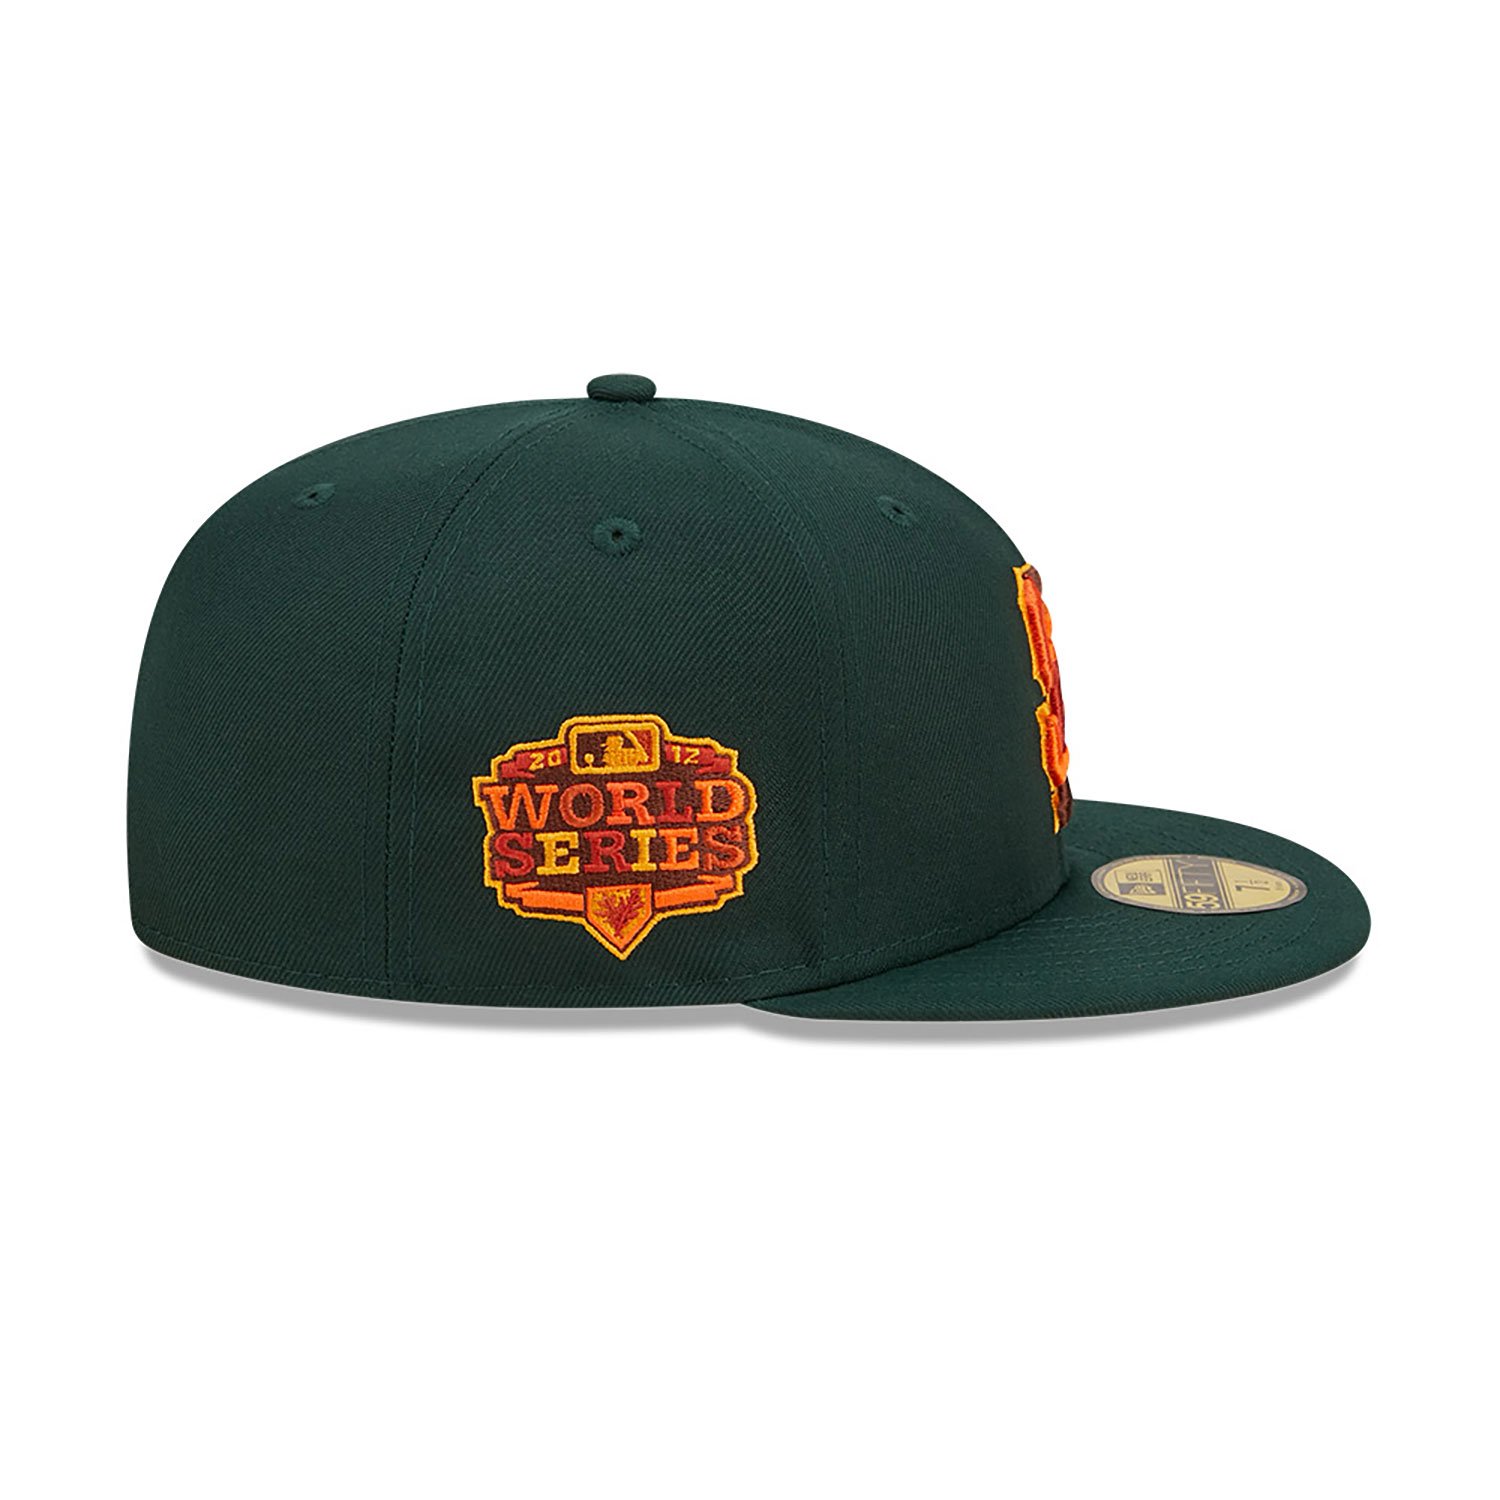 San Francisco Giants Leafy Dark Green 59FIFTY Fitted Cap